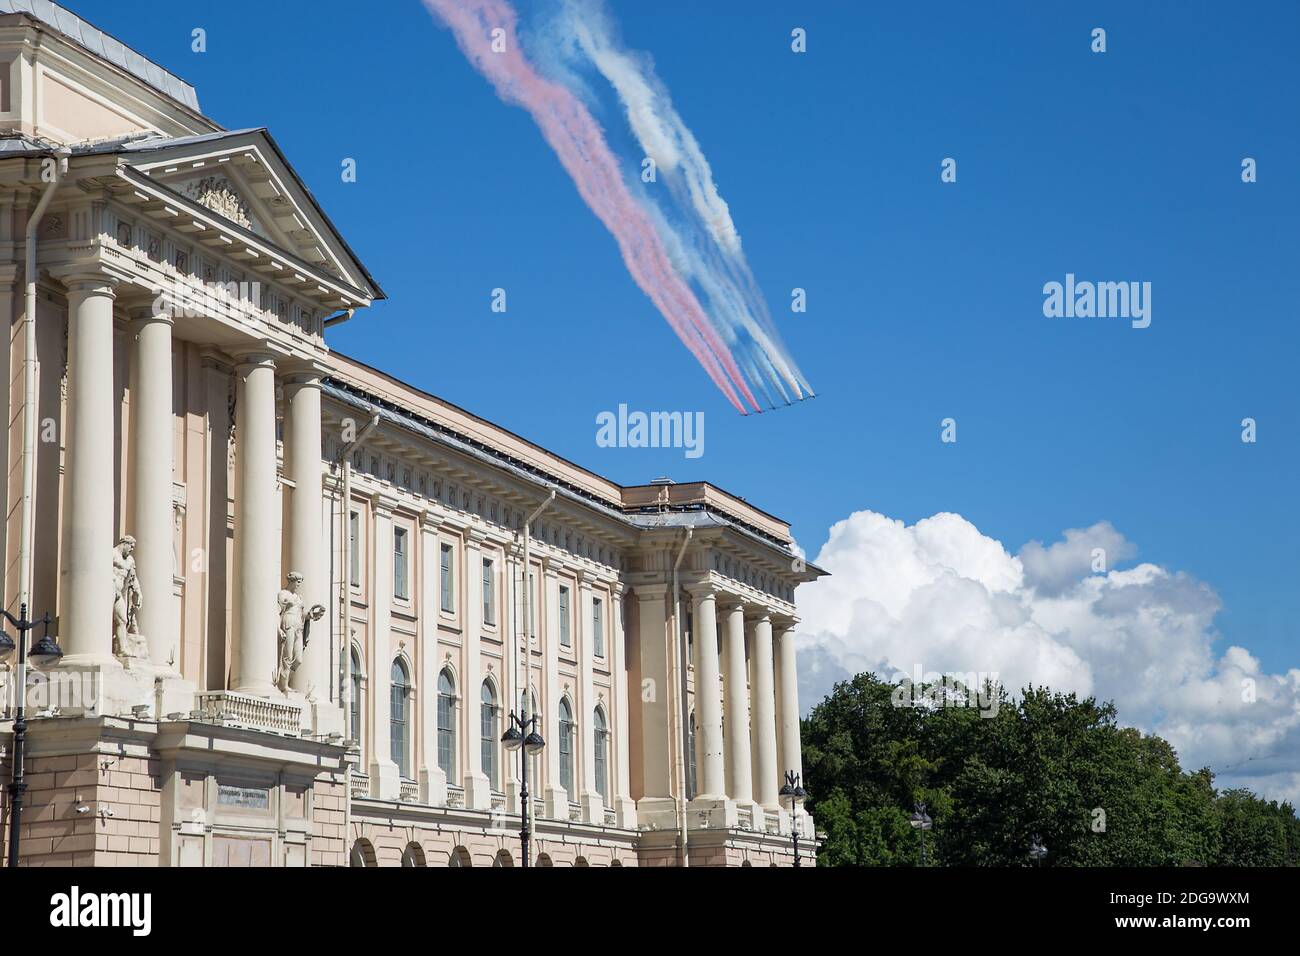 07.26.2020. Russia, St. Petersburg: Aviation parade. The military aviation parade on the Day of the Navy. A group of Su-25 attack aircraft draws the R Stock Photo